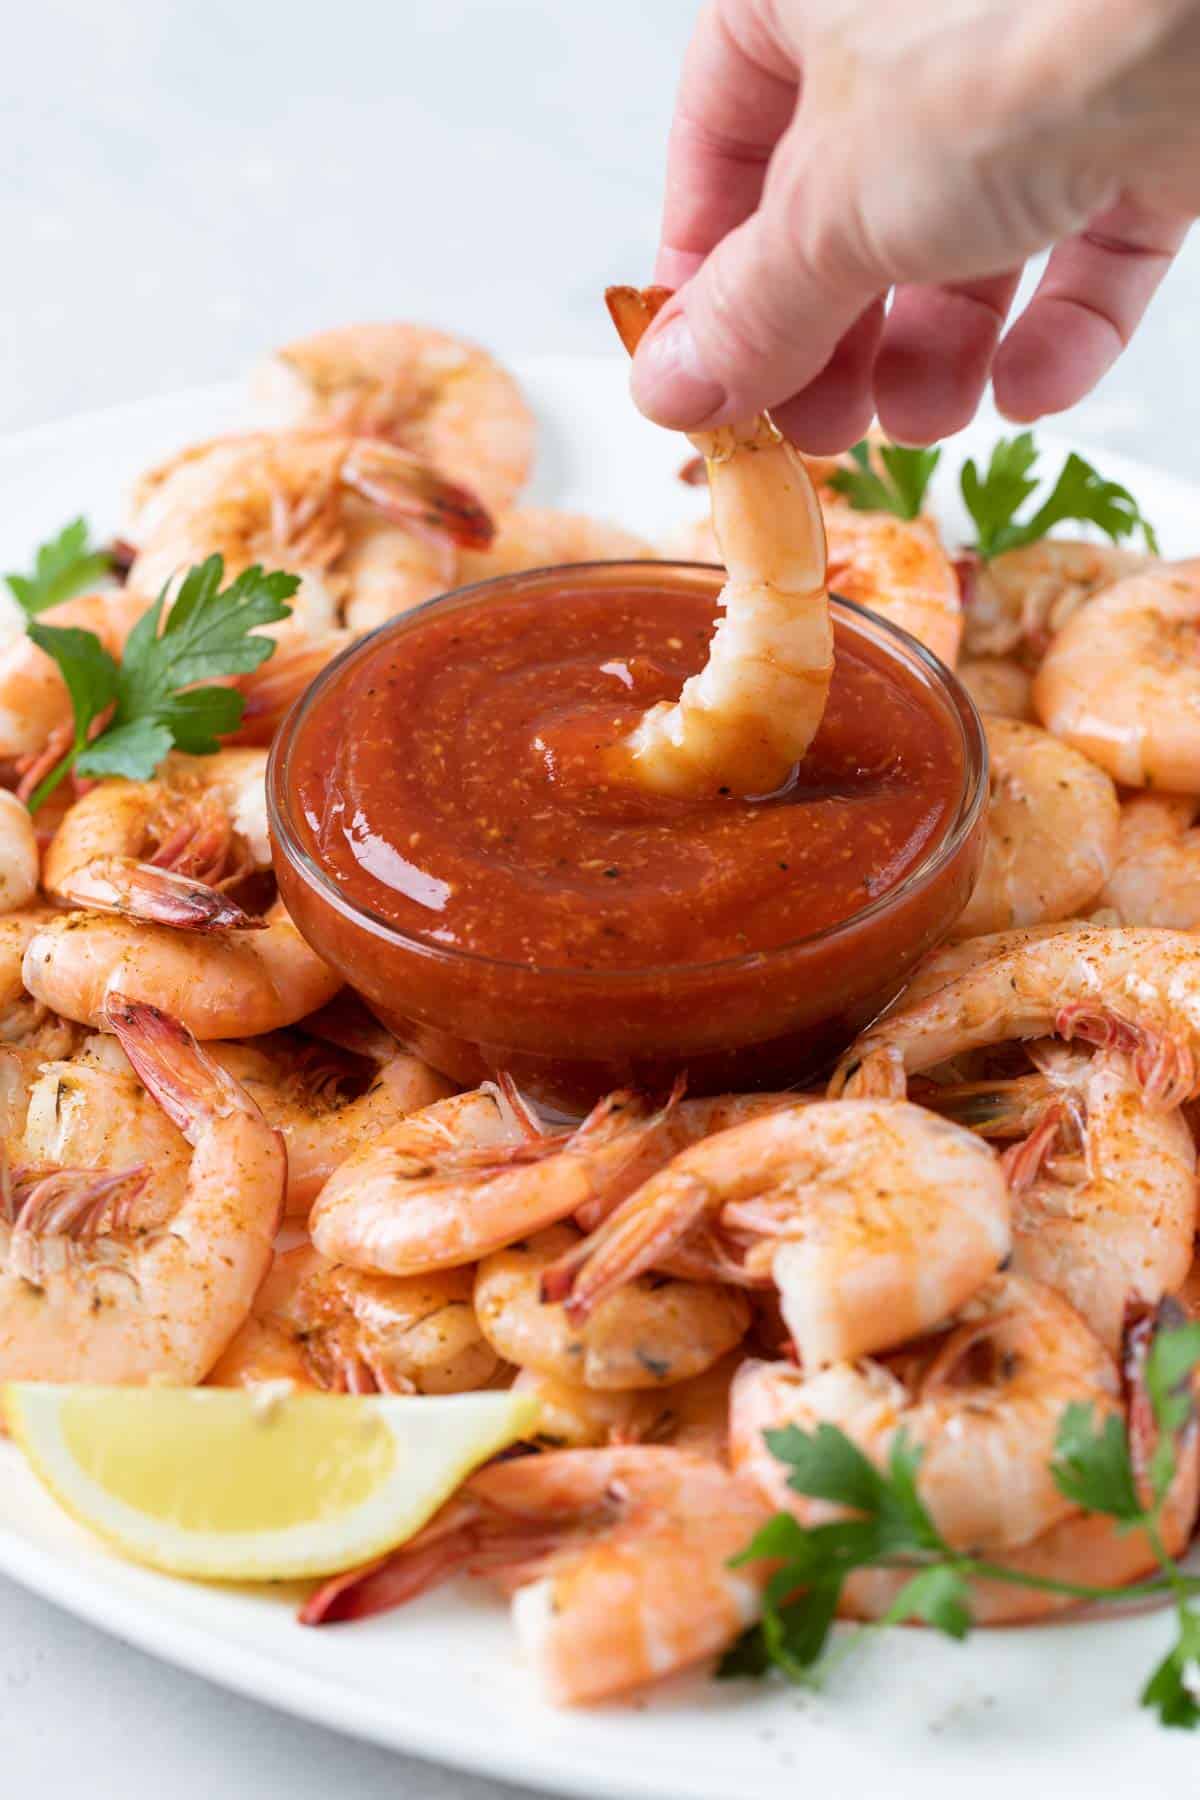 A shrimp is being dipped into a bowl of cocktail sauce.